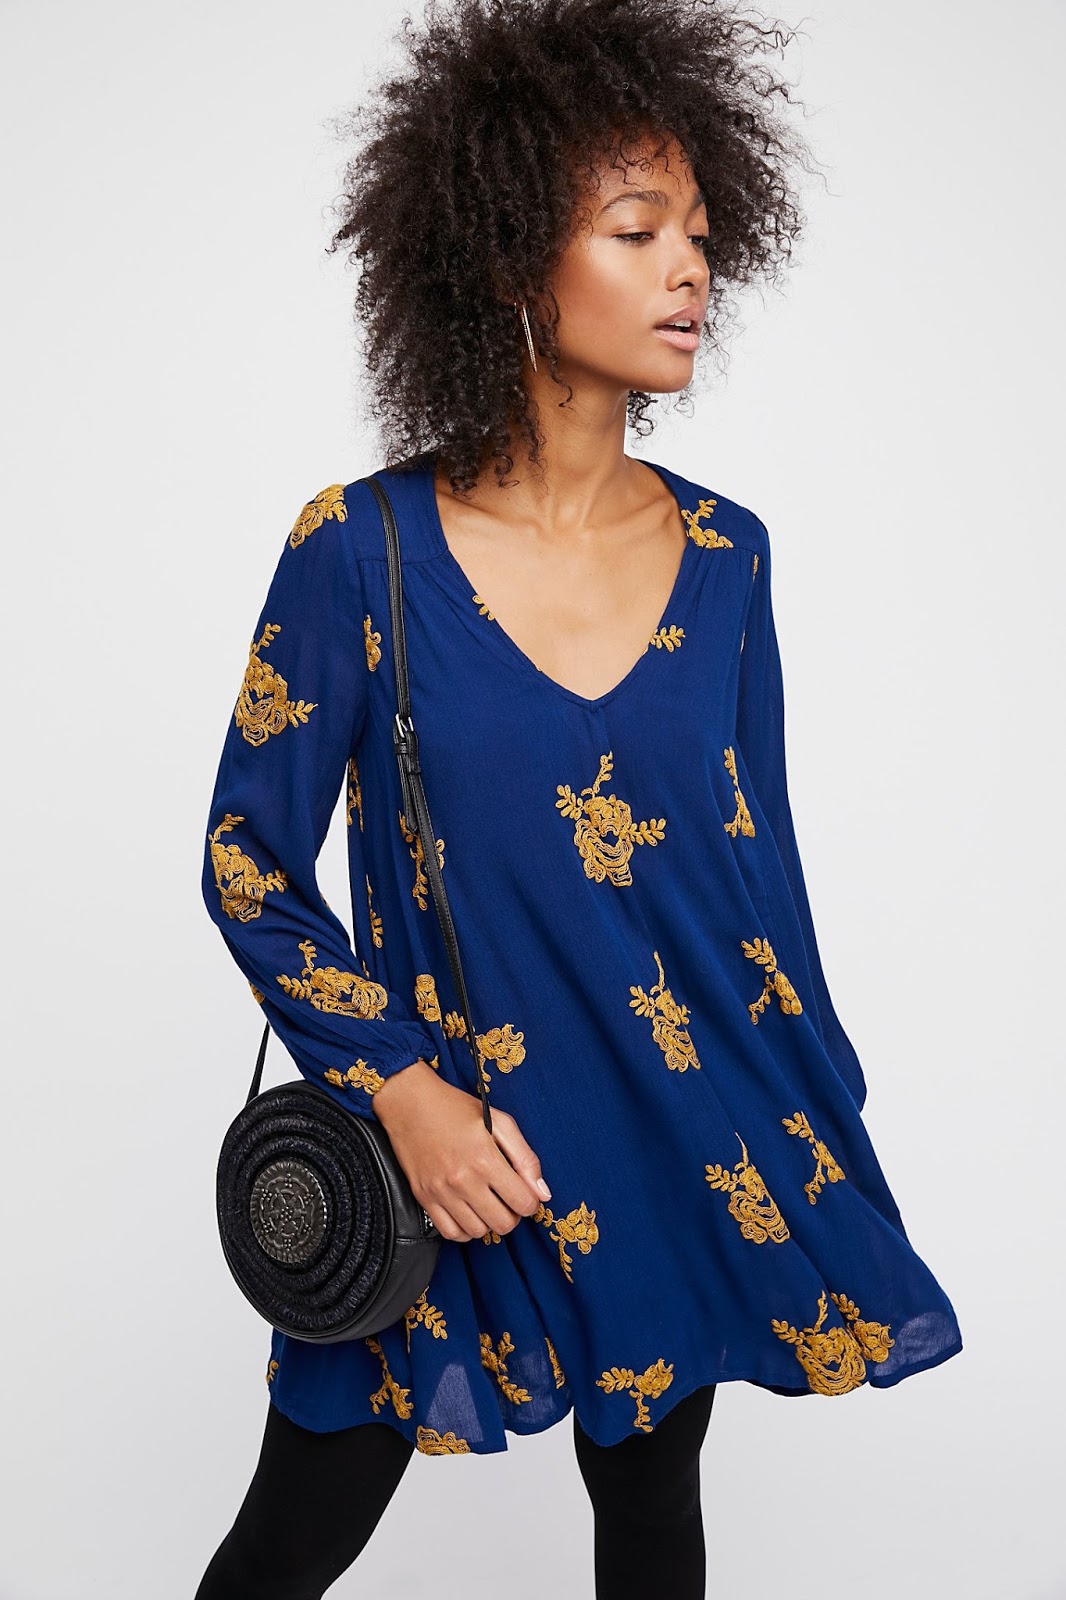 Free People's Black Friday sale is coming early...like, TODAY!